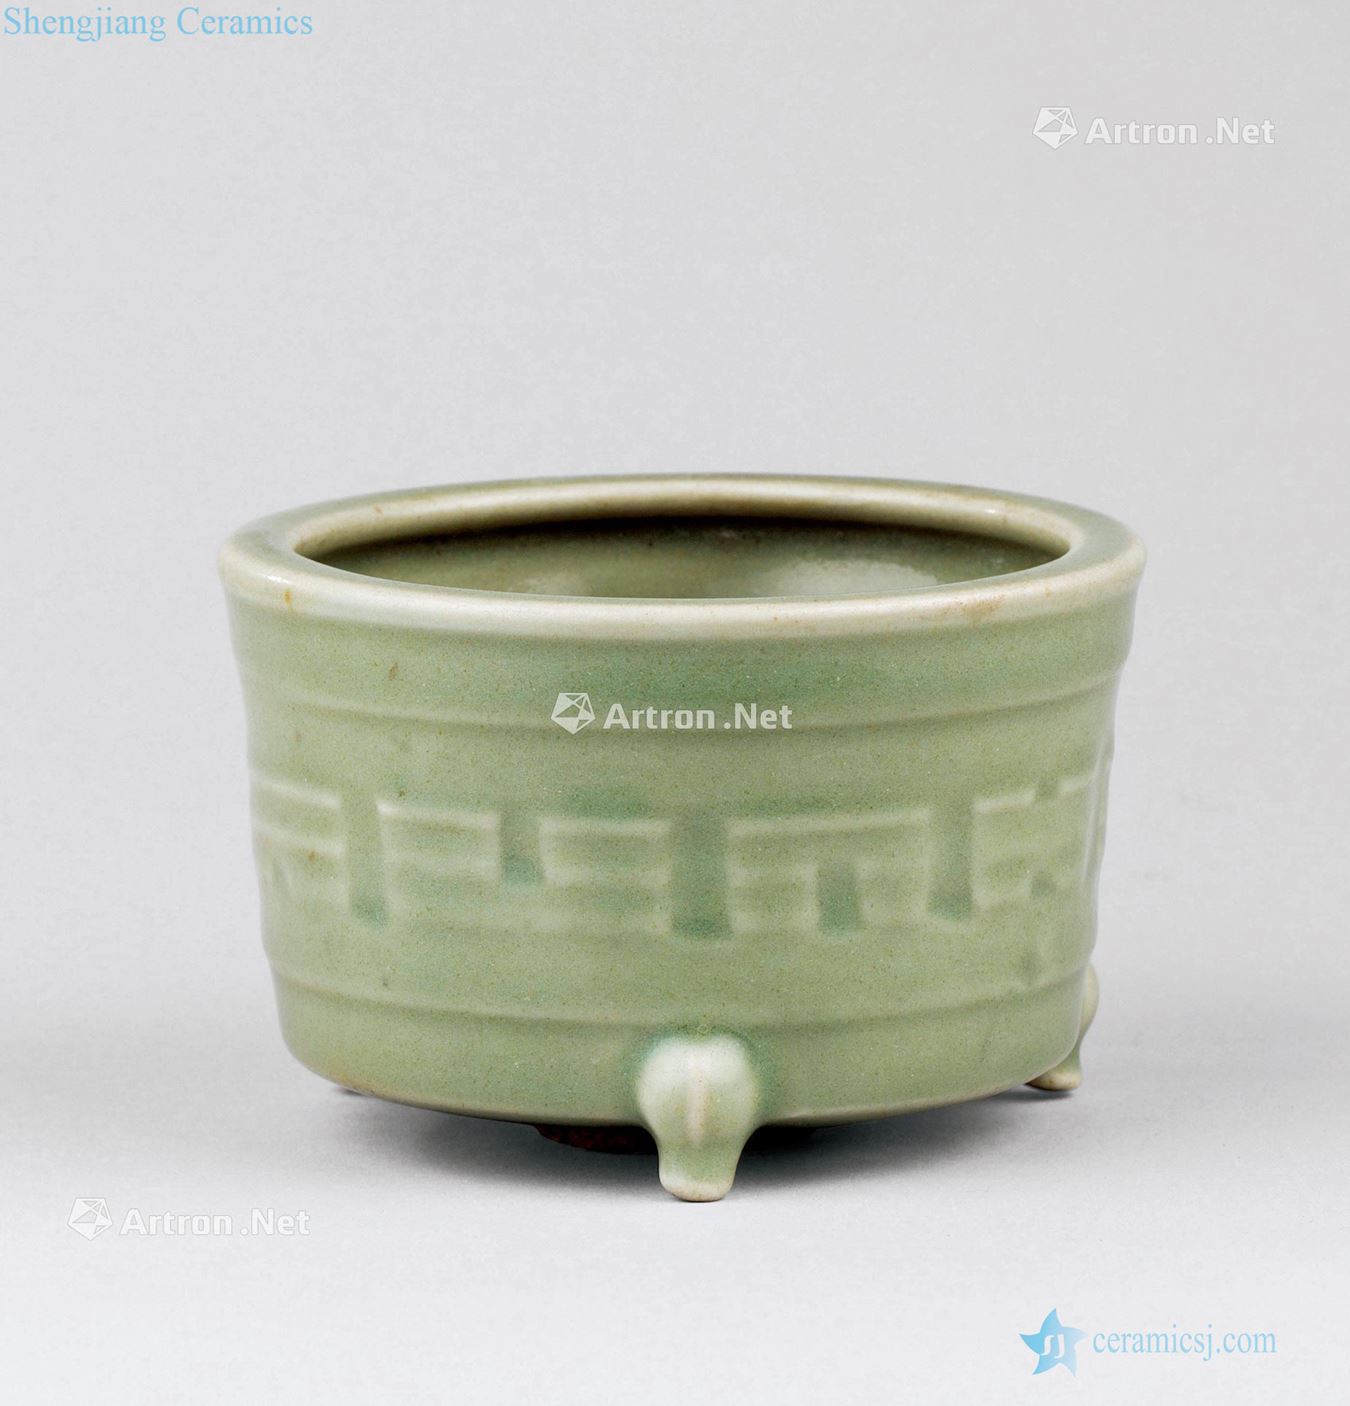 The southern song dynasty (1115-1234), longquan celadon gossip wen incense burner with three legs